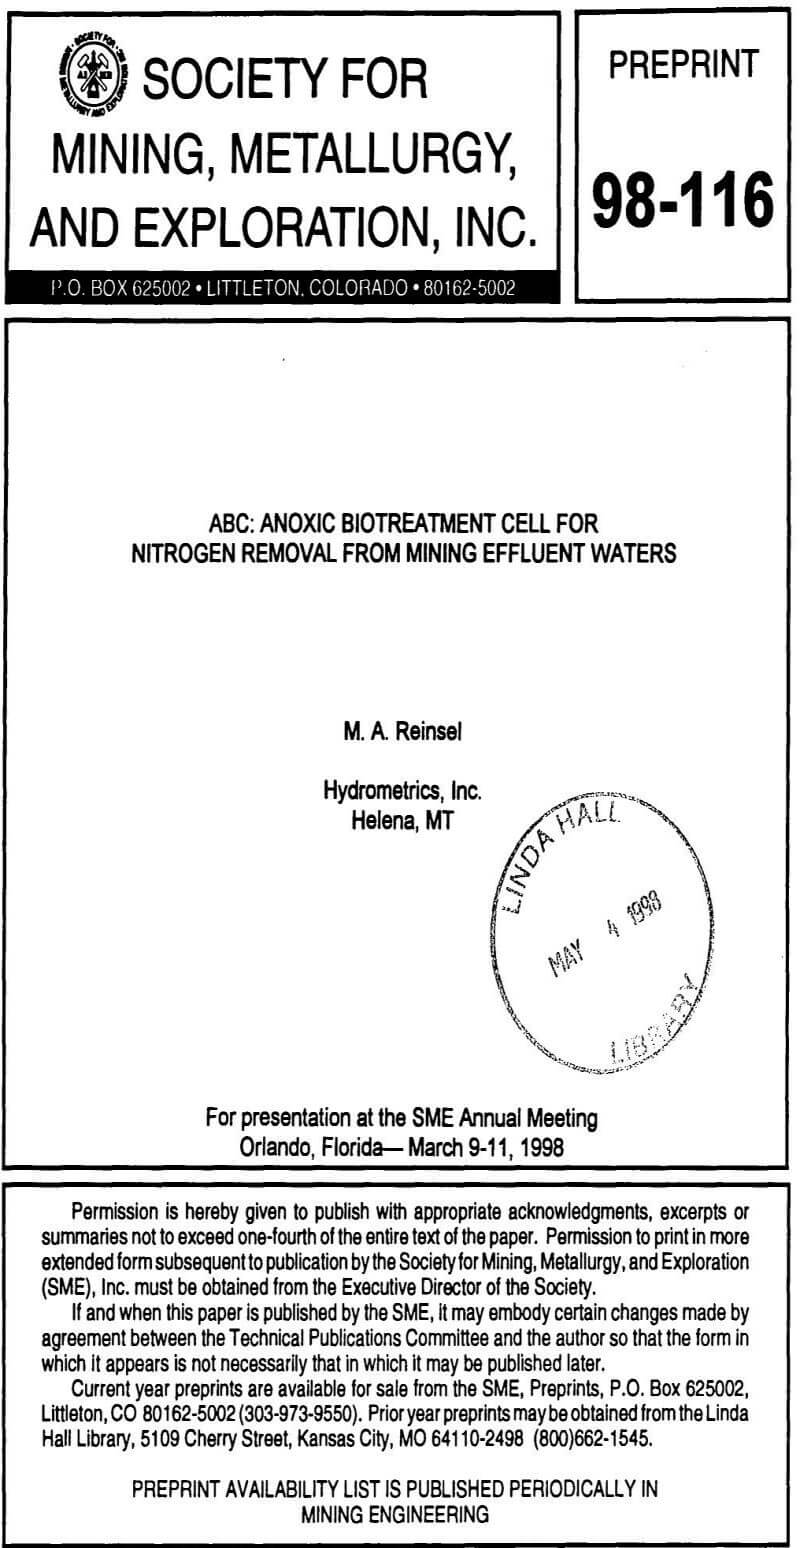 anoxic biotreatment cell for nitrogen removal from mining effluent waters